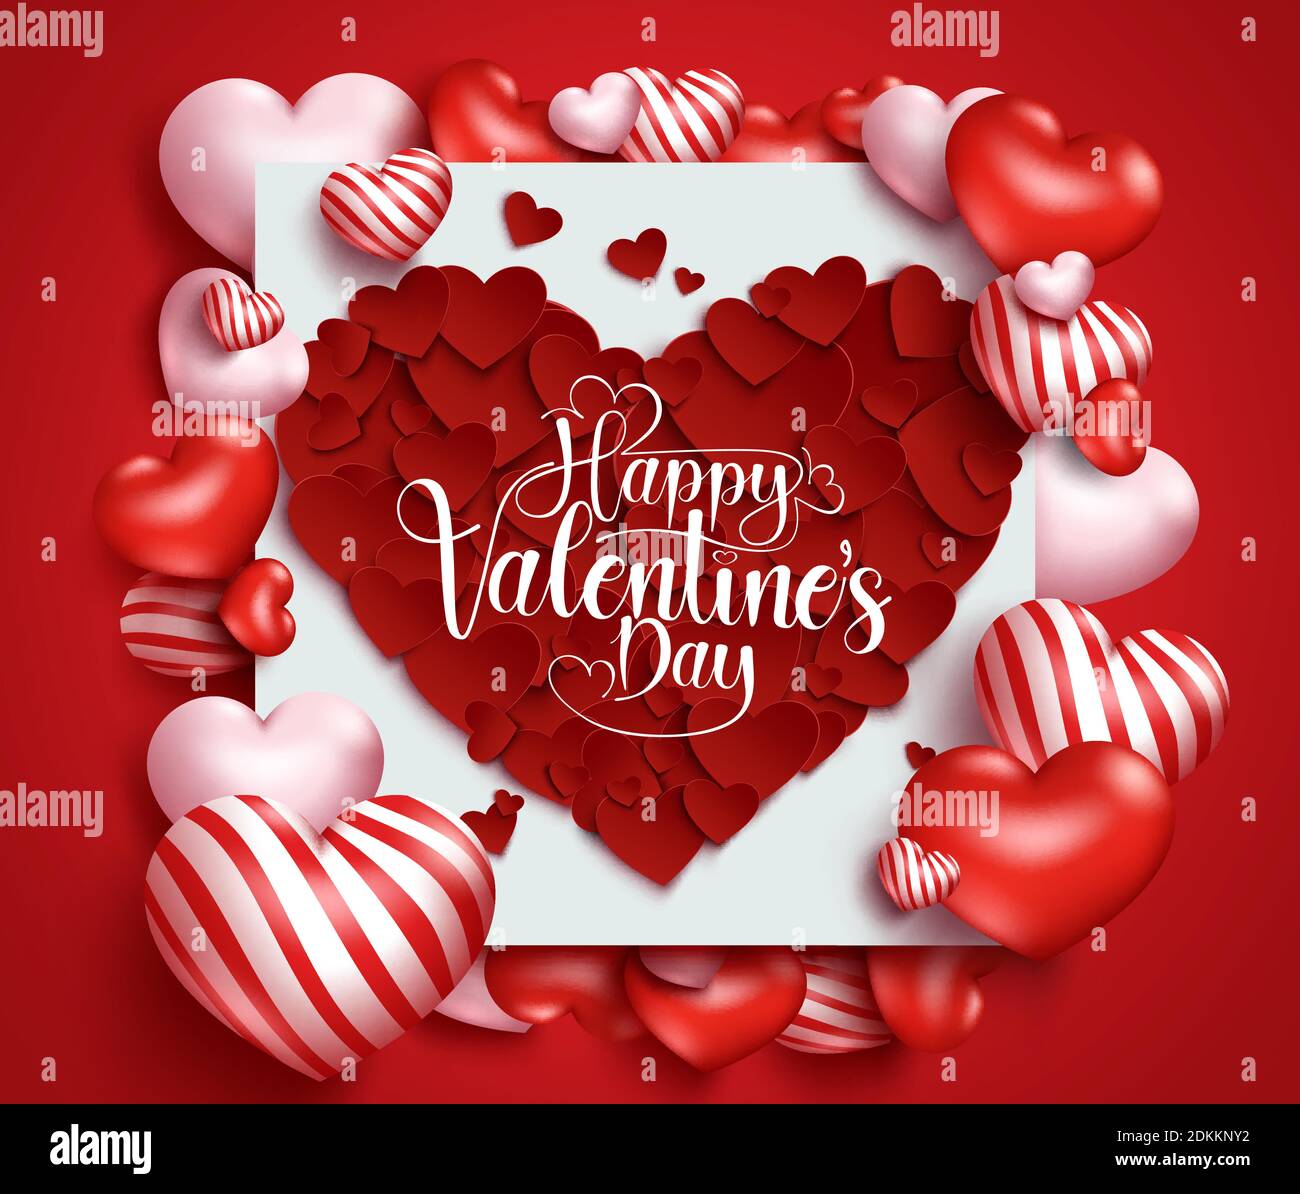 Valentines Hearts Vector Background Design Happy Valentines Day Text In Heart Shape For